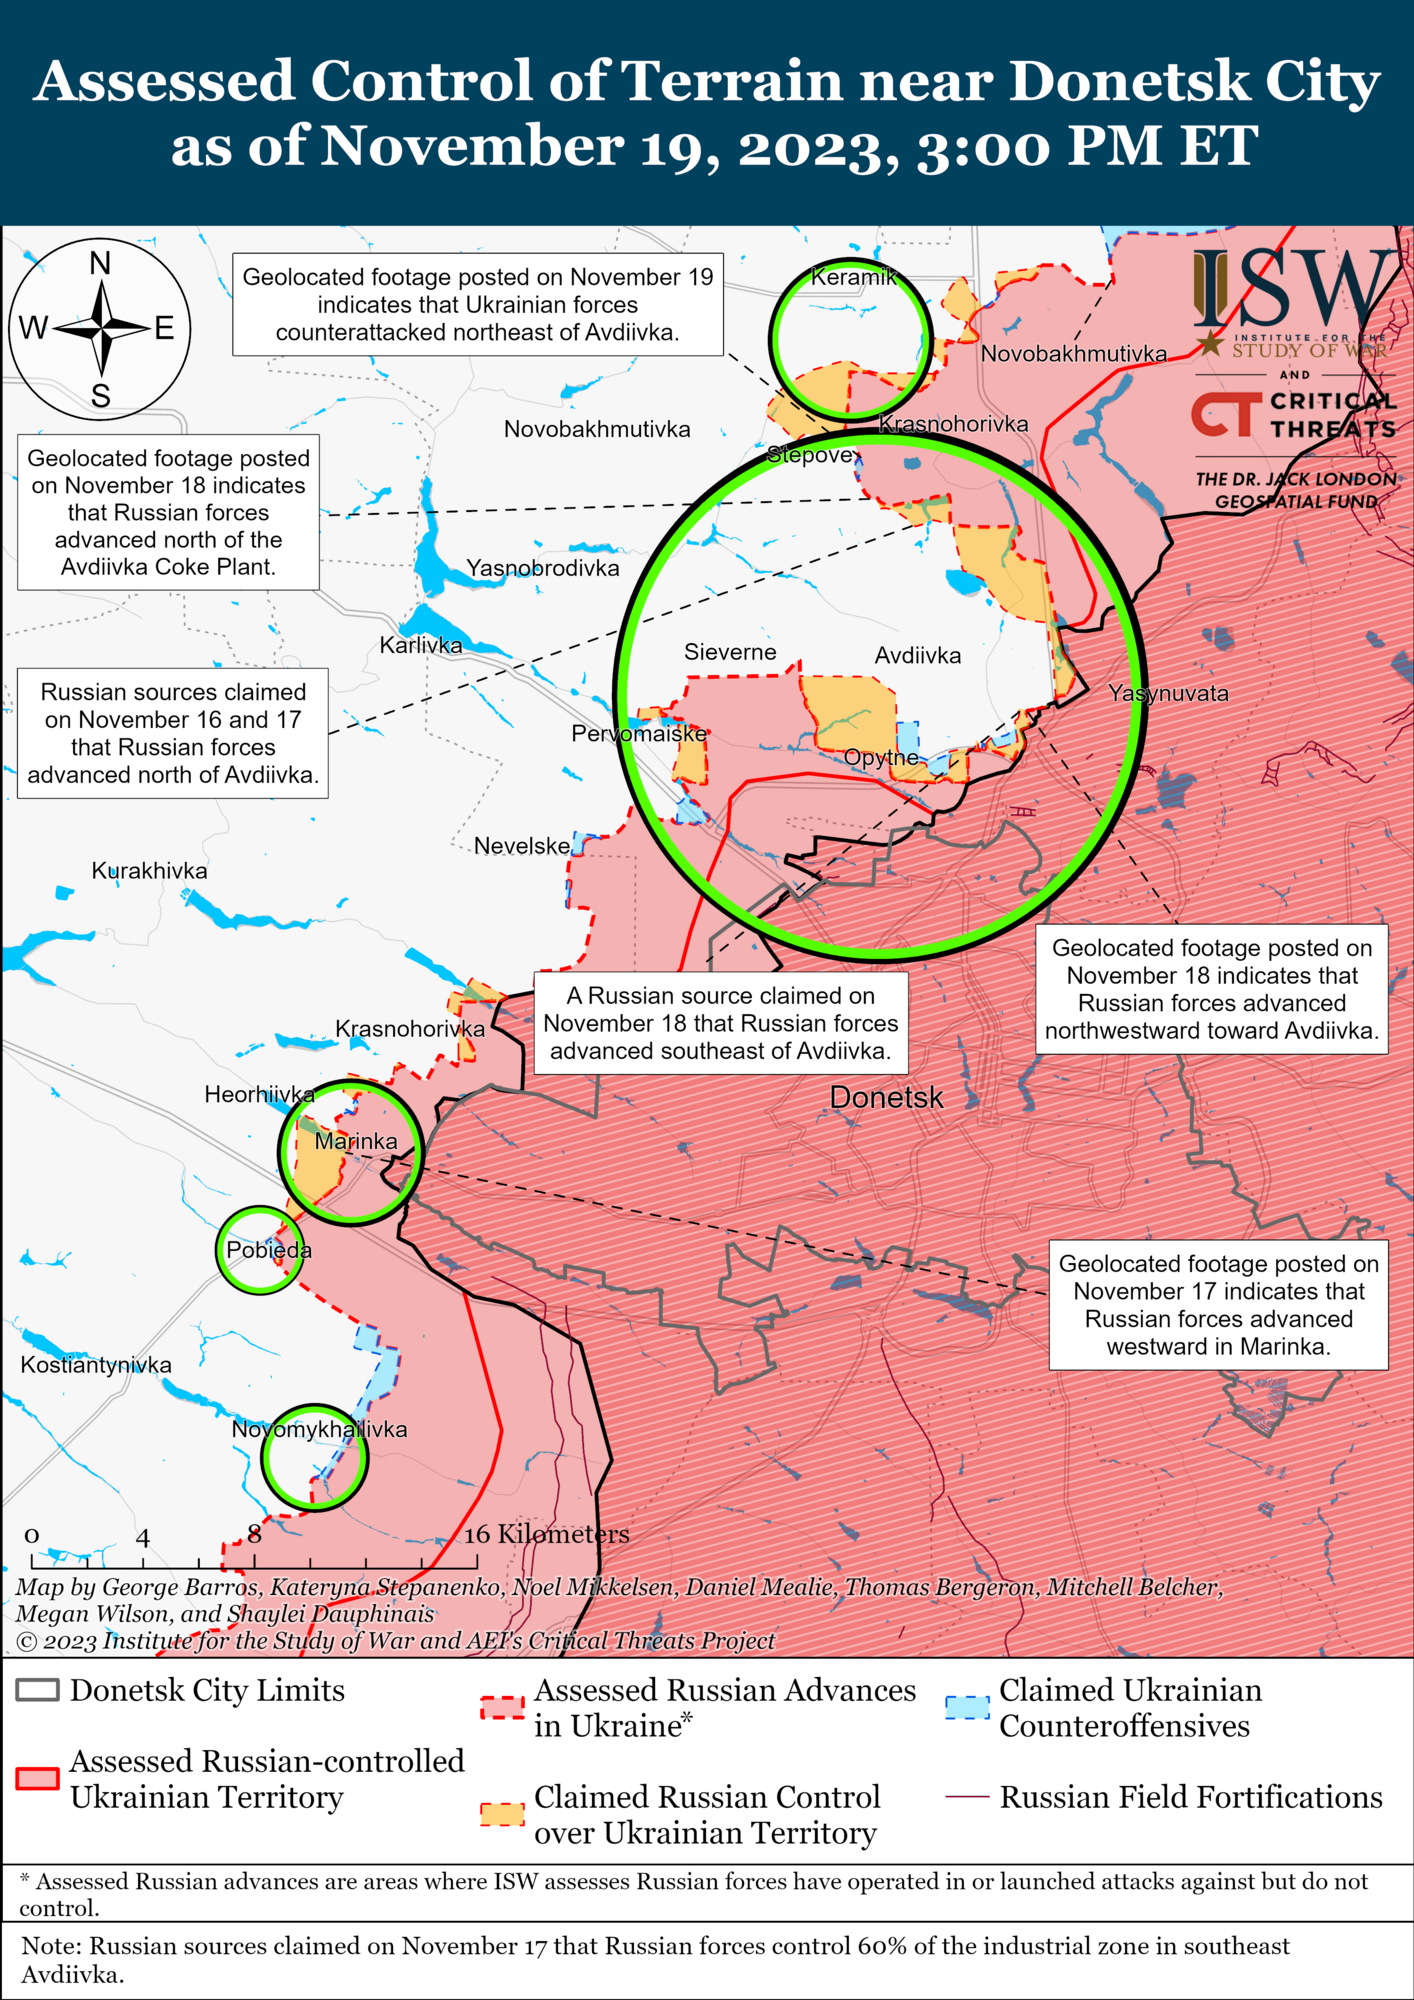 ISW tells how the deterioration of the weather will affect the pace of fighting in Ukraine